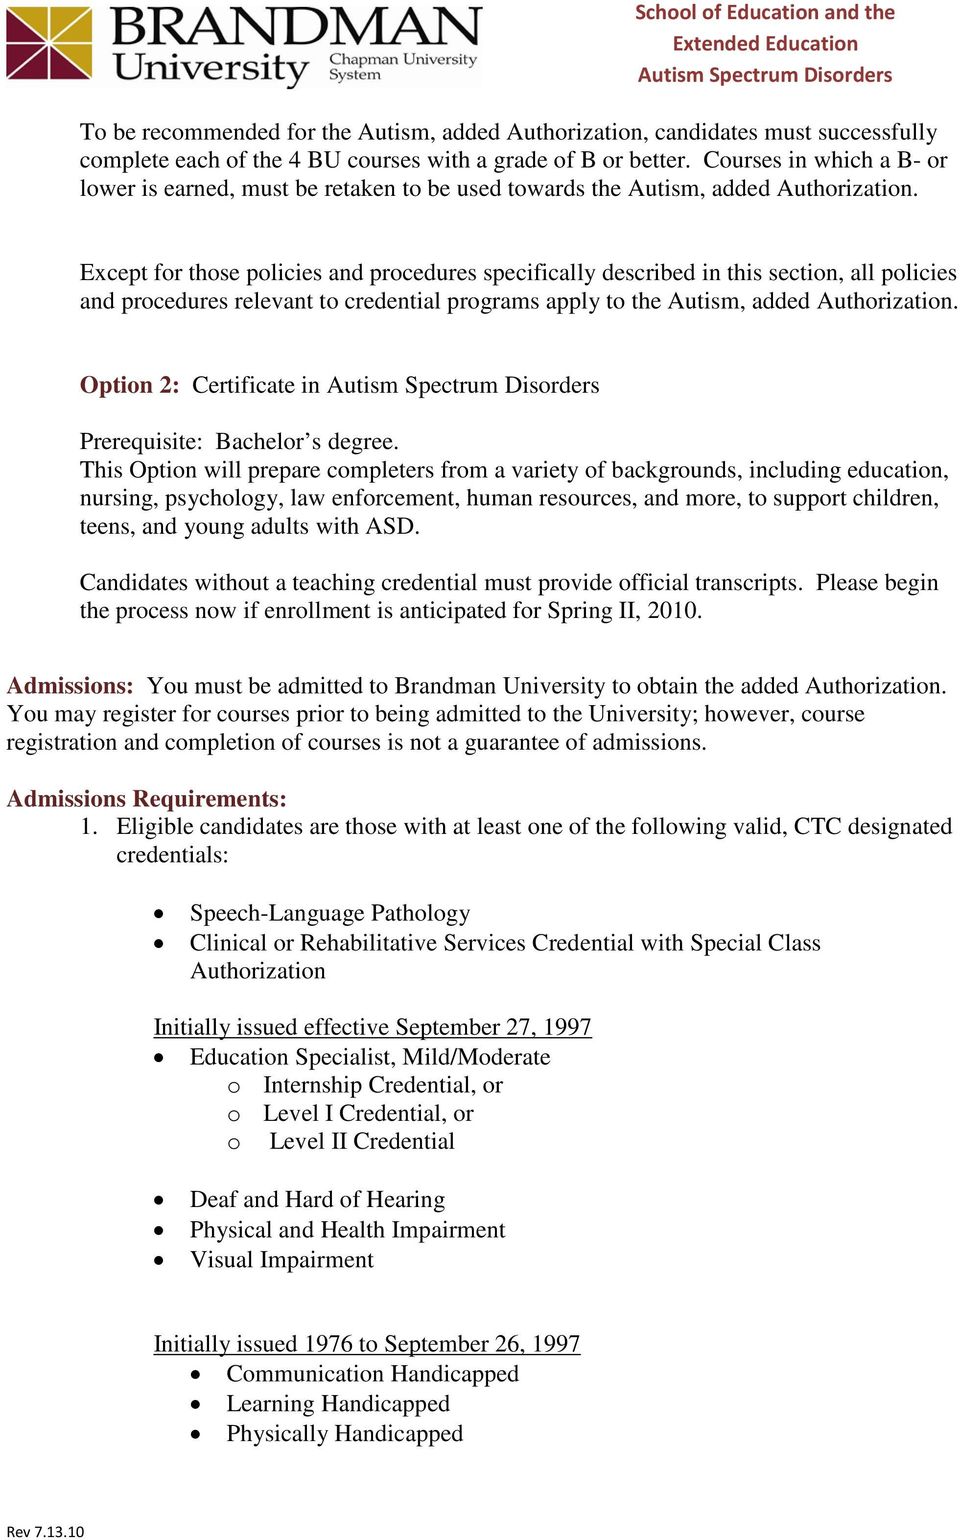 Except for those policies and procedures specifically described in this section, all policies and procedures relevant to credential programs apply to the Autism, added Authorization.